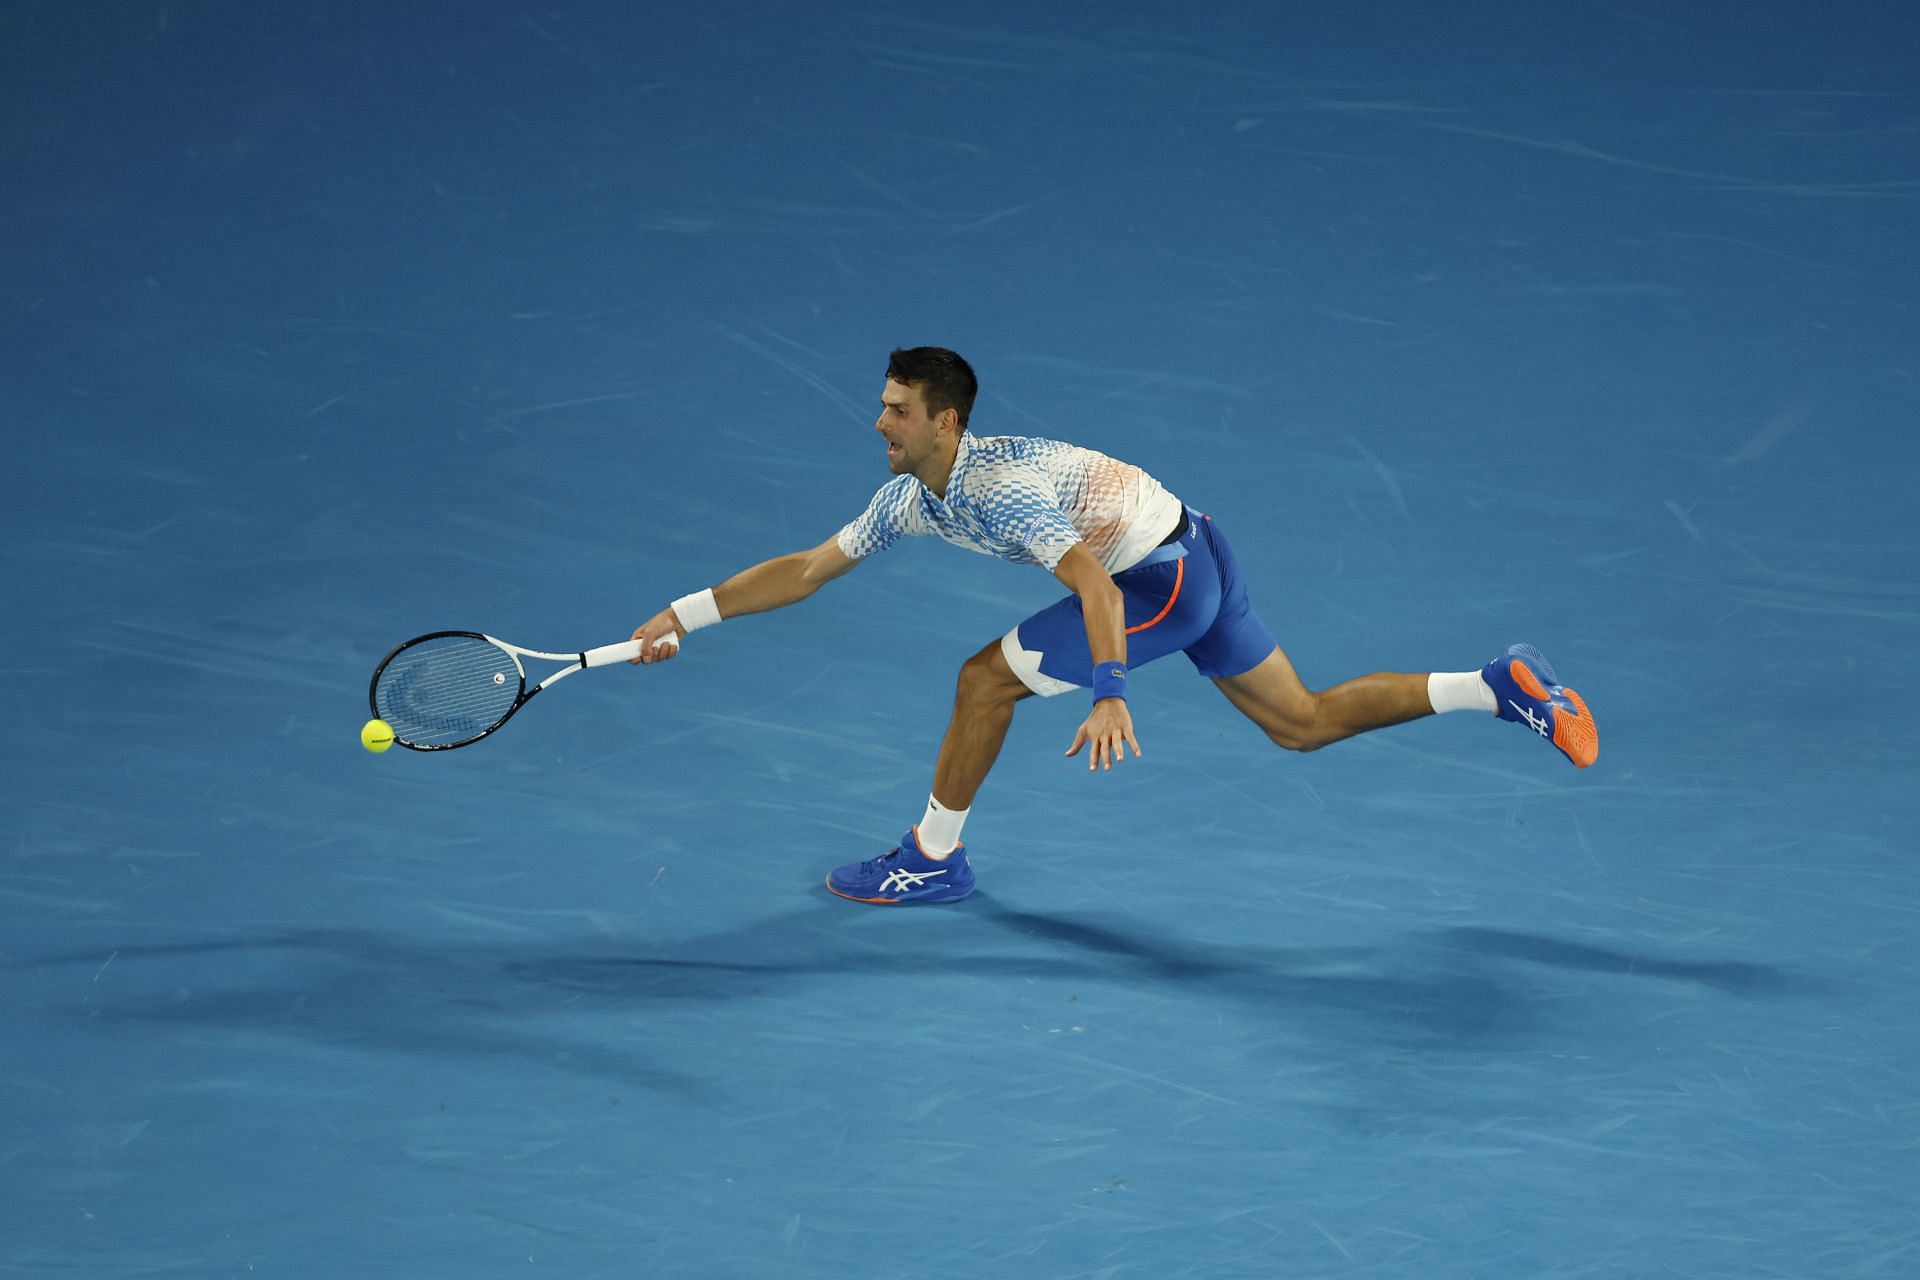 In action at the 2023 Australian Open